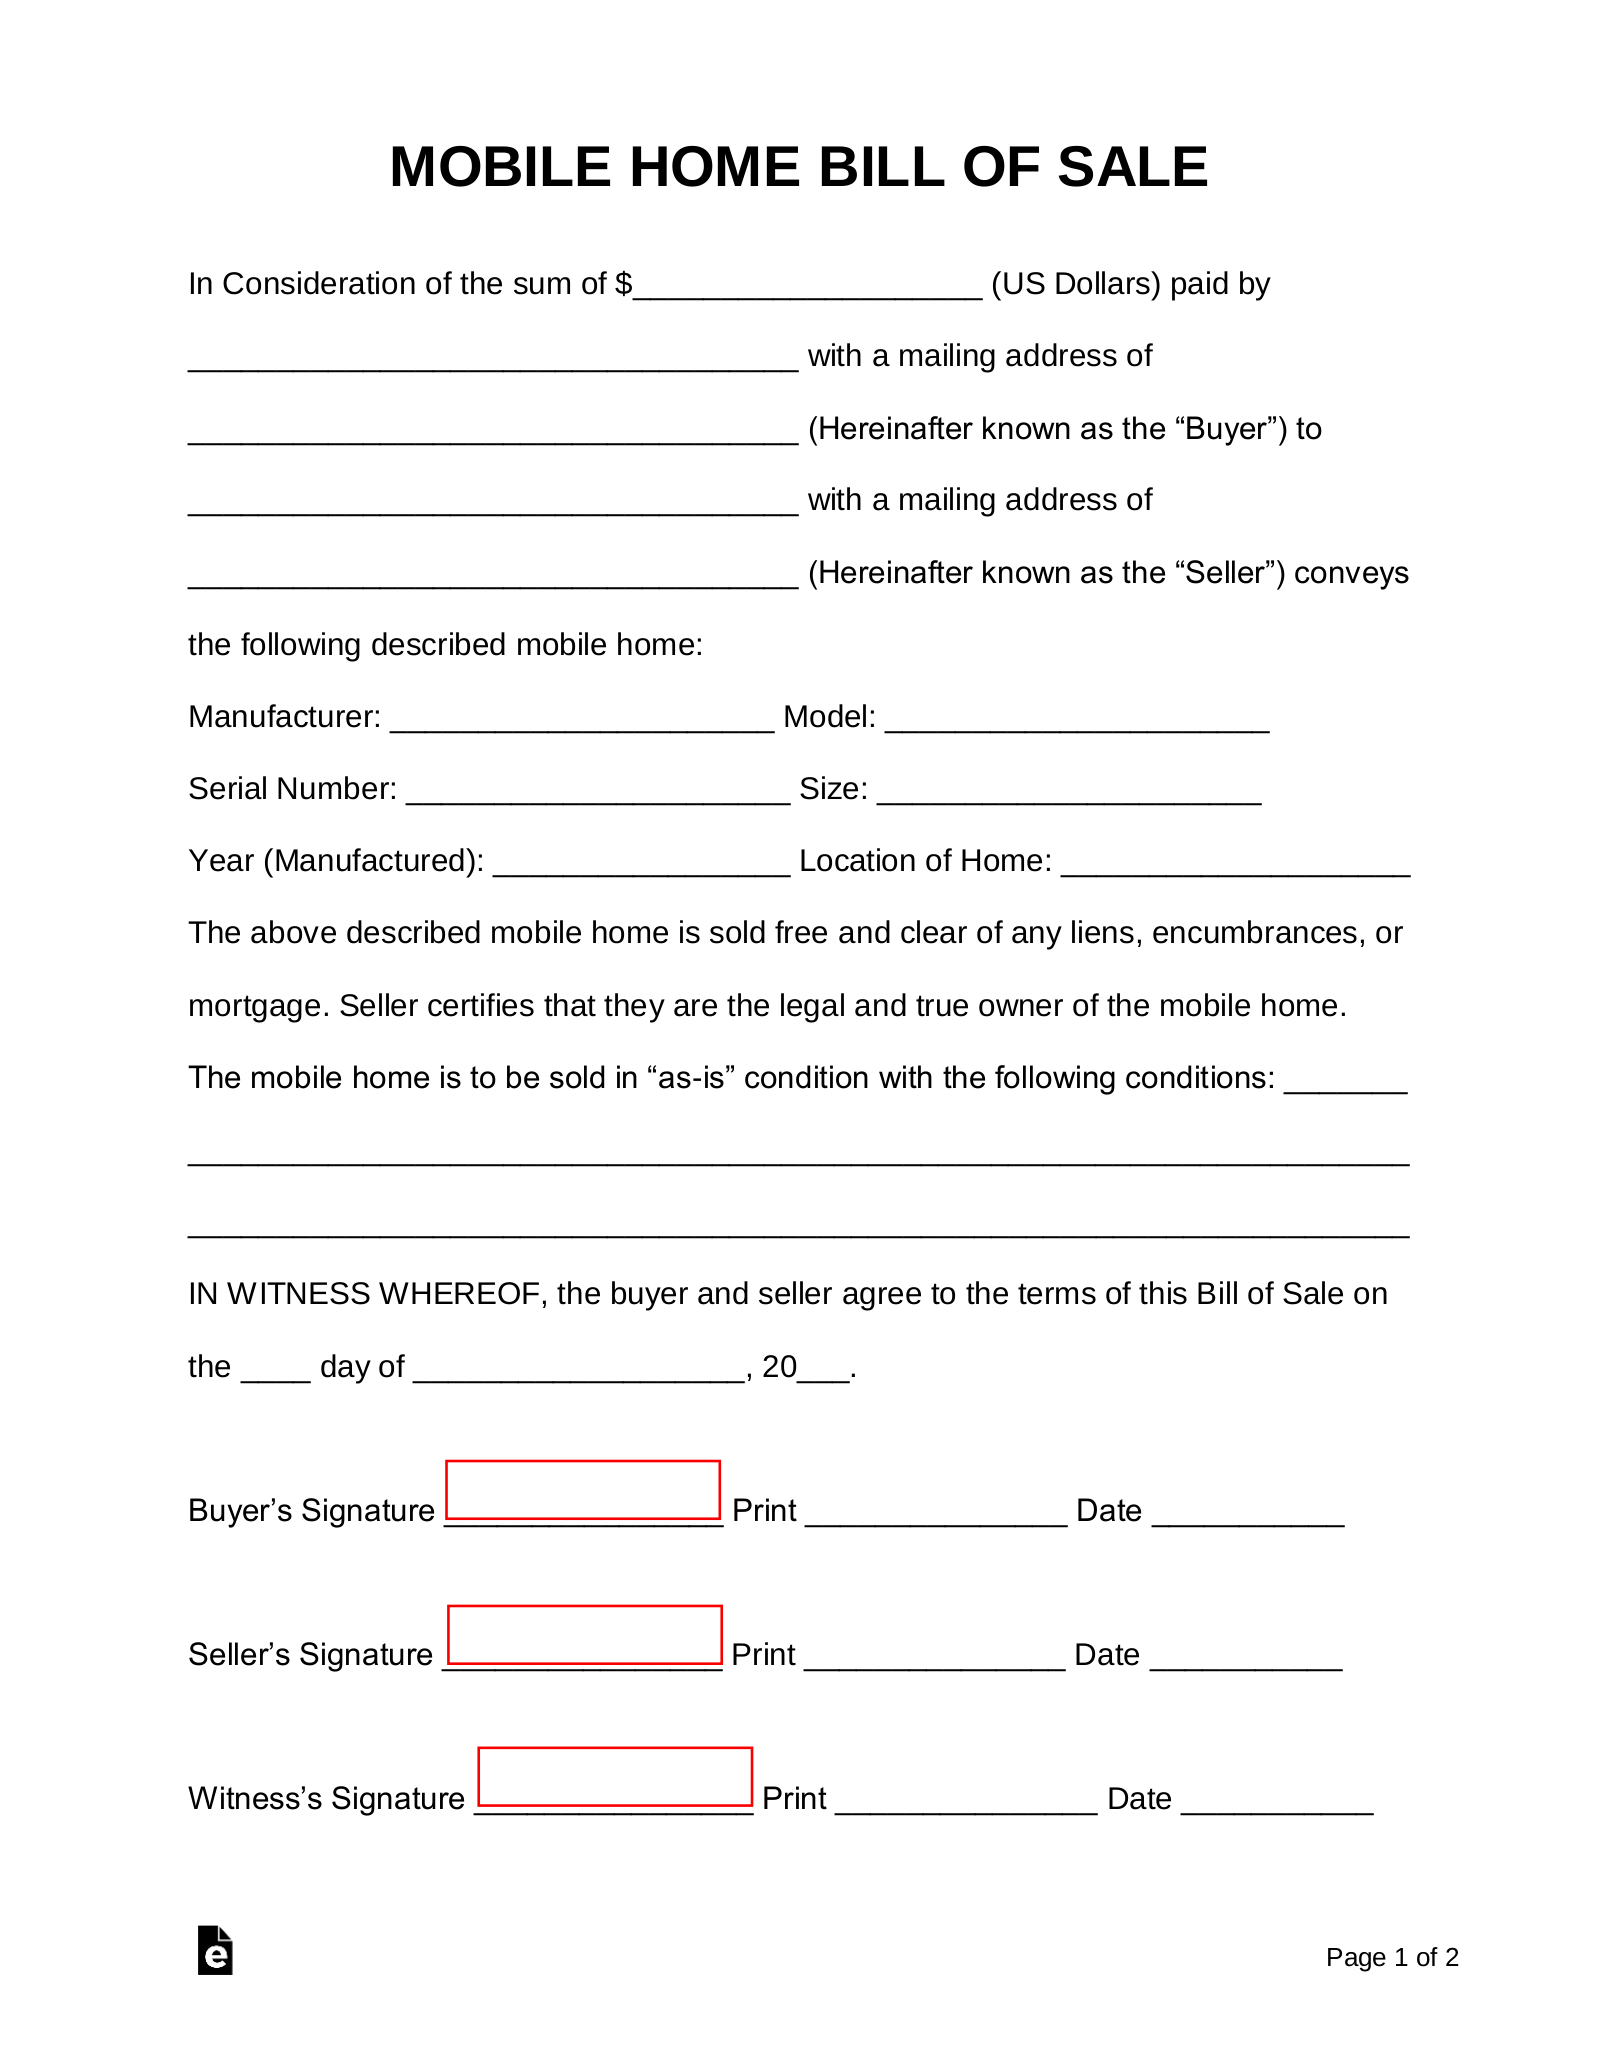 Mobile (Manufactured) Home Bill of Sale Form